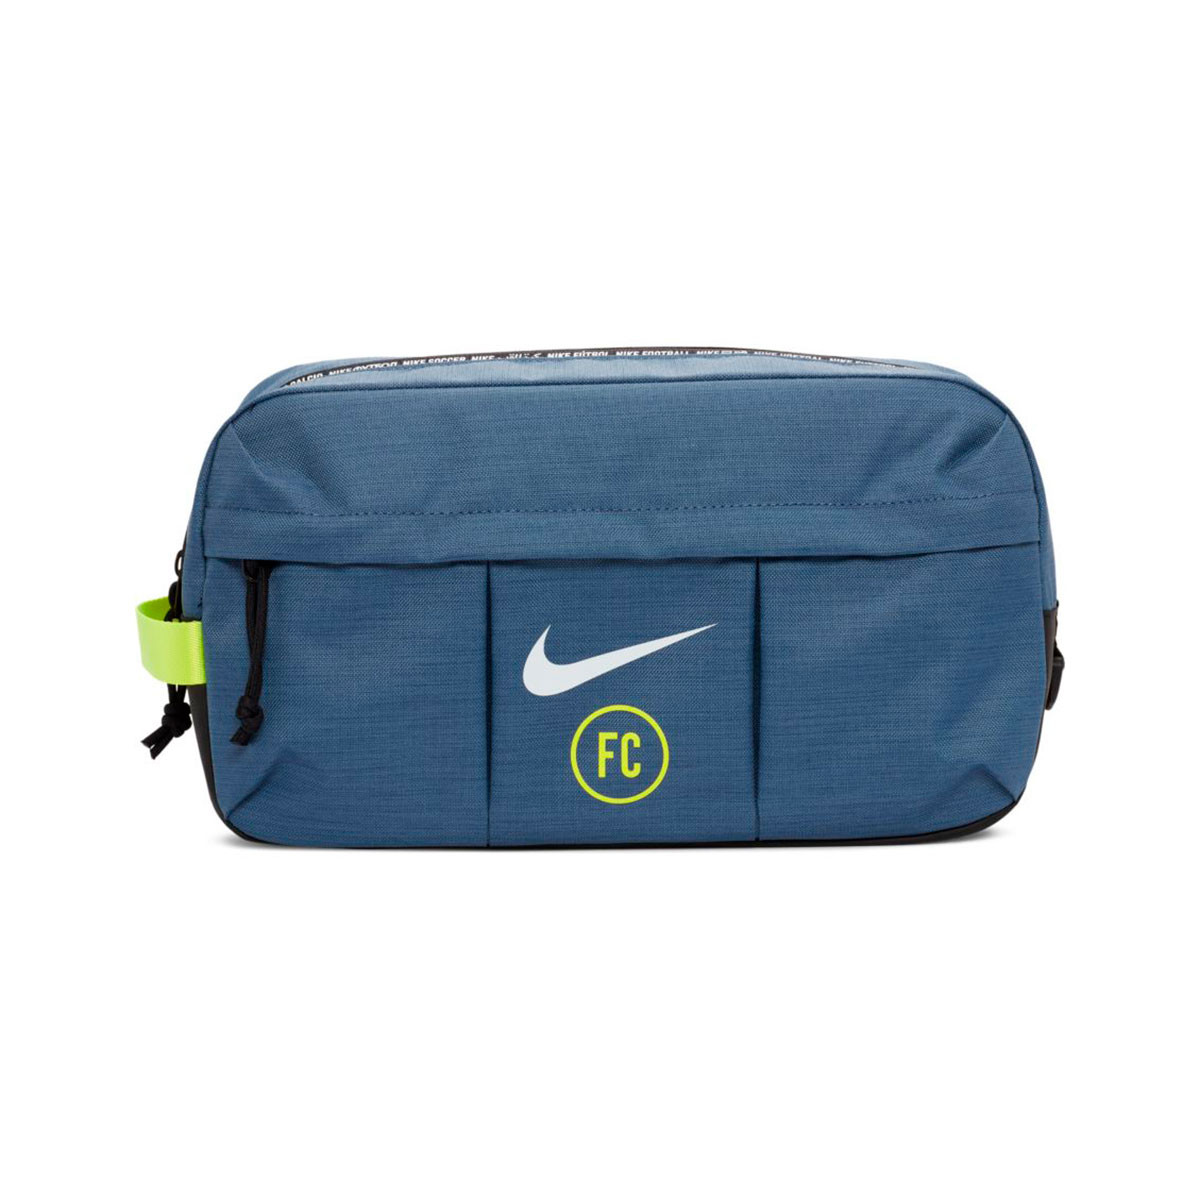 Boot bag Nike Academy Diffused blue 